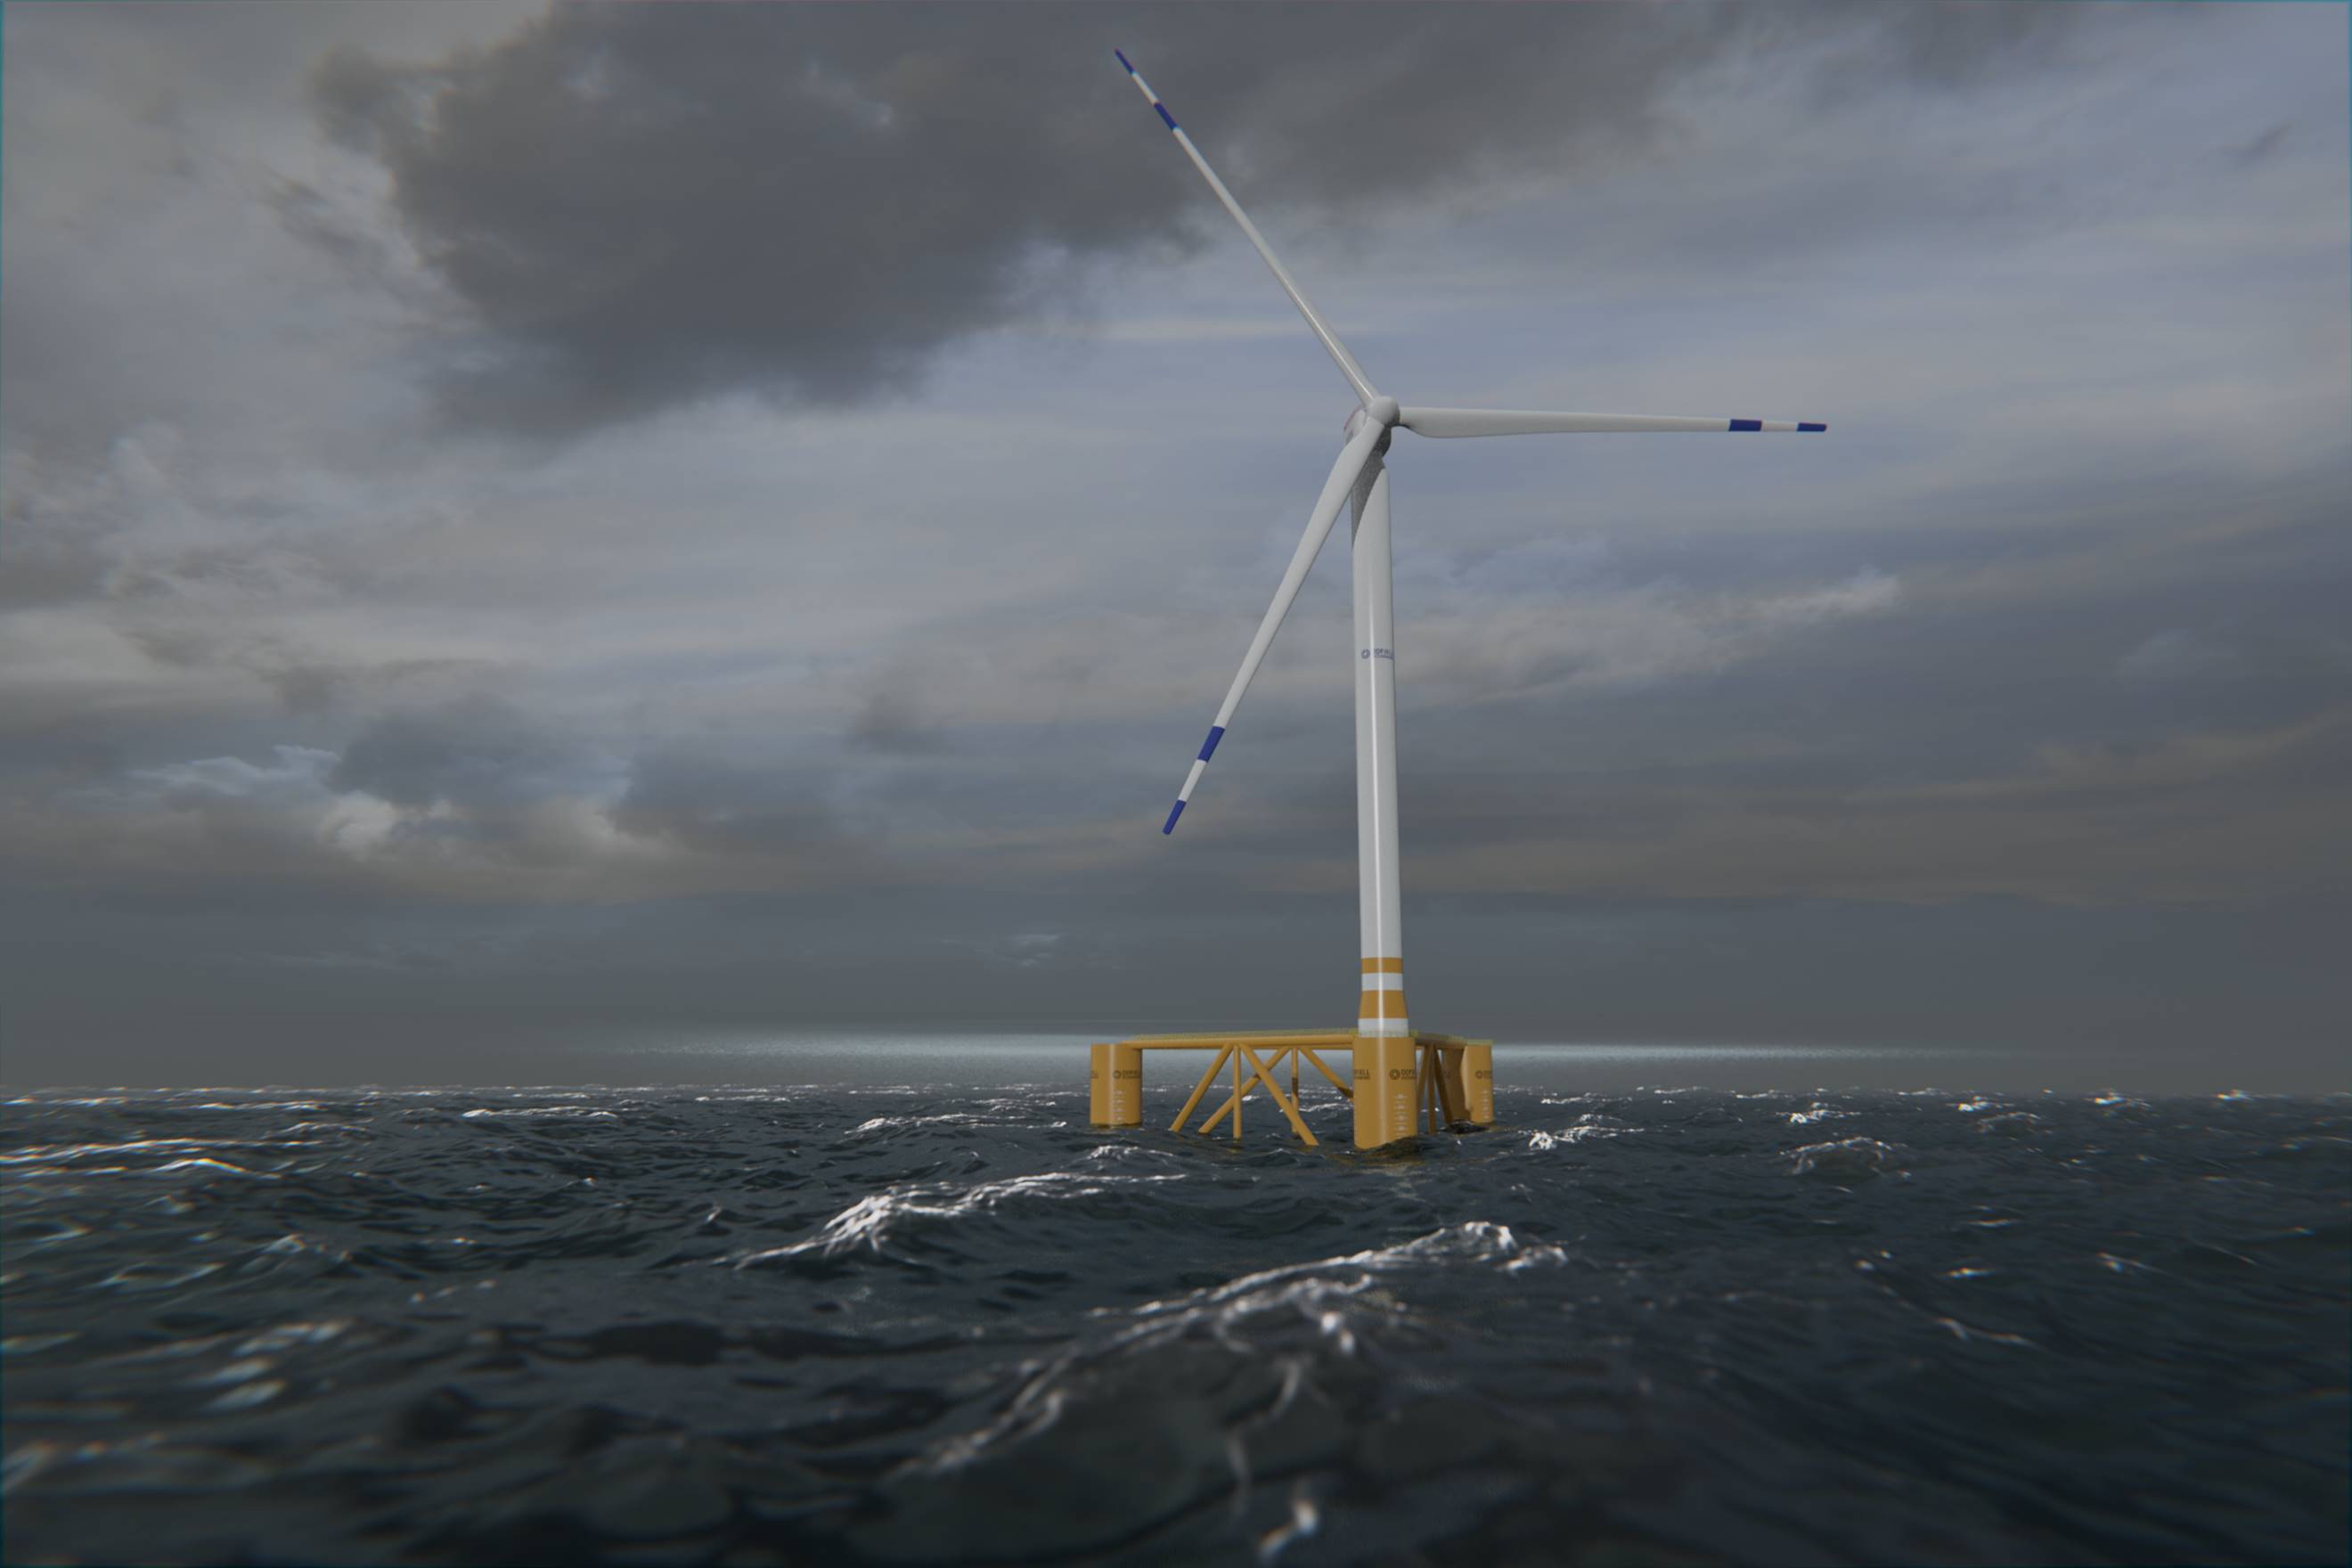 Debunking some myths about offshore wind’s role in the energy transition